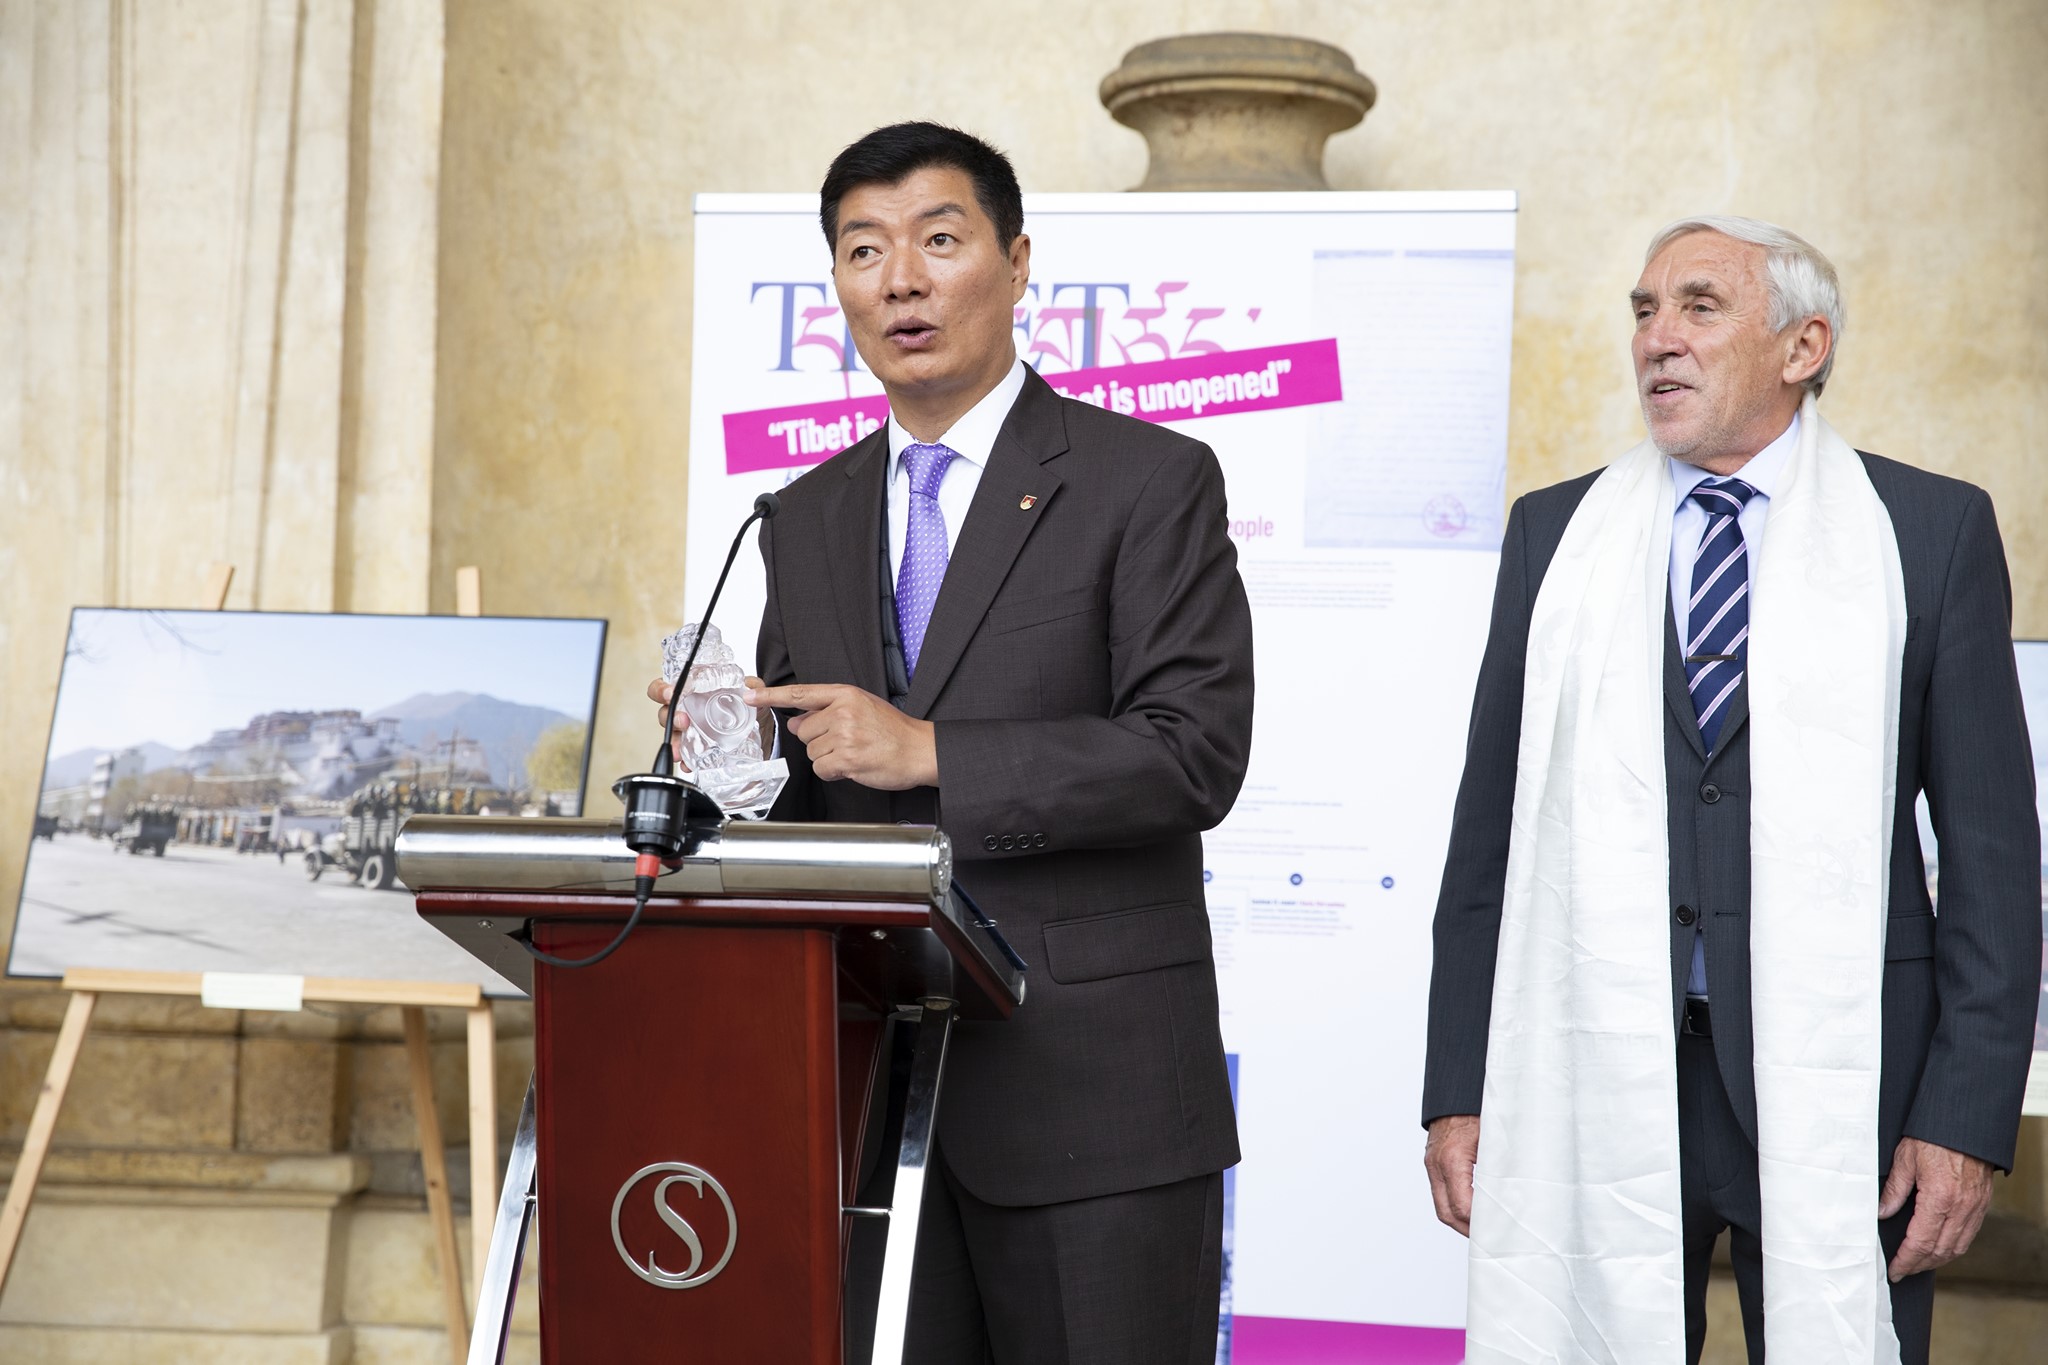 Featured image for “Lobsang Sangay, Prime Minister of the Tibetan government-in-exile, received in the Senate”